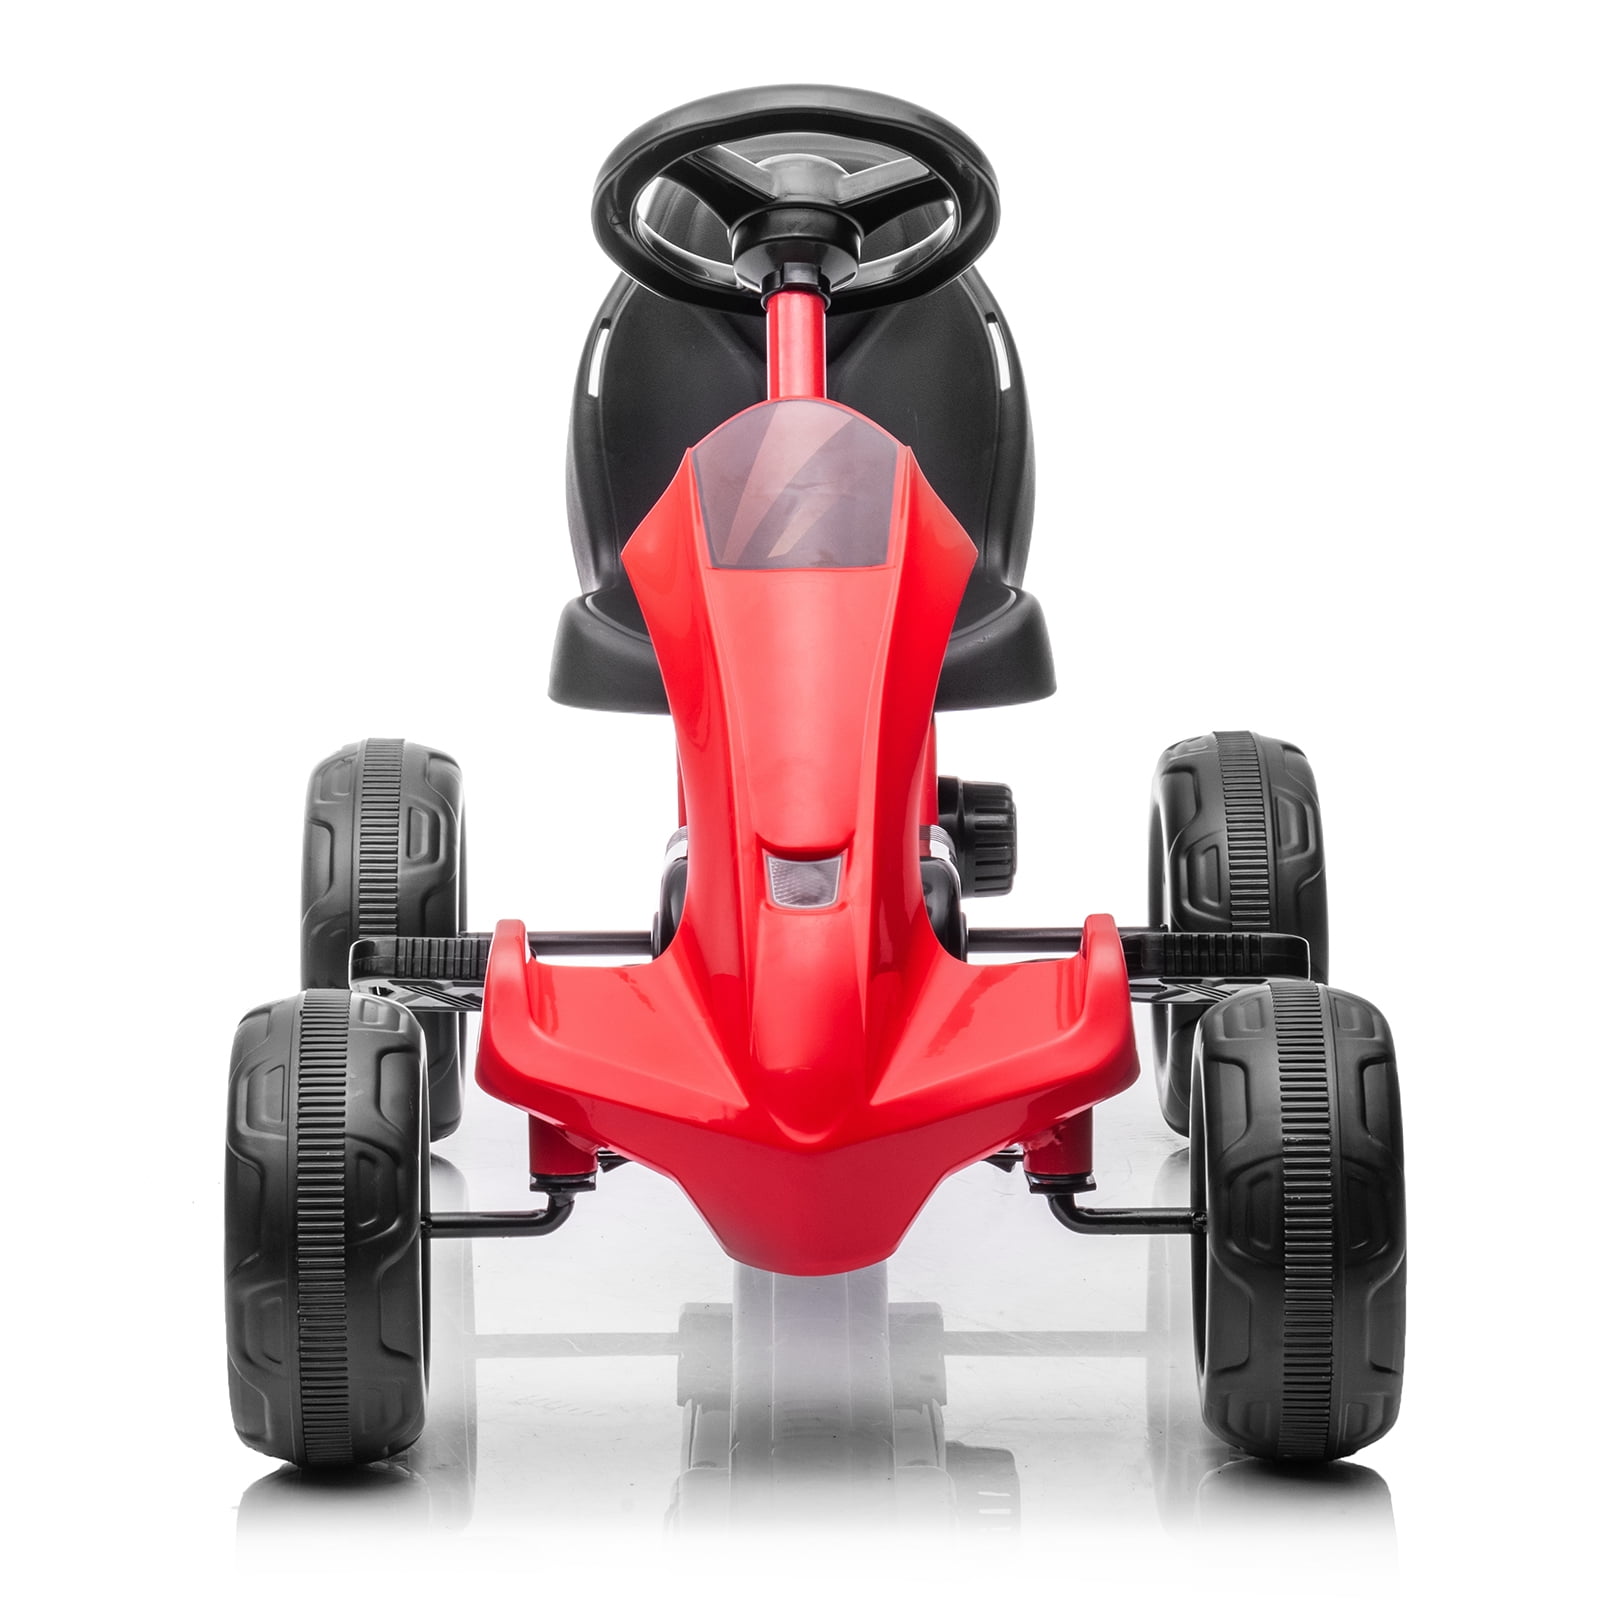 Details about   Kids Pedal Car Go Kart Racing Car Ride On Outdoor Toy Boys Gift 3-8 YEARS Red 